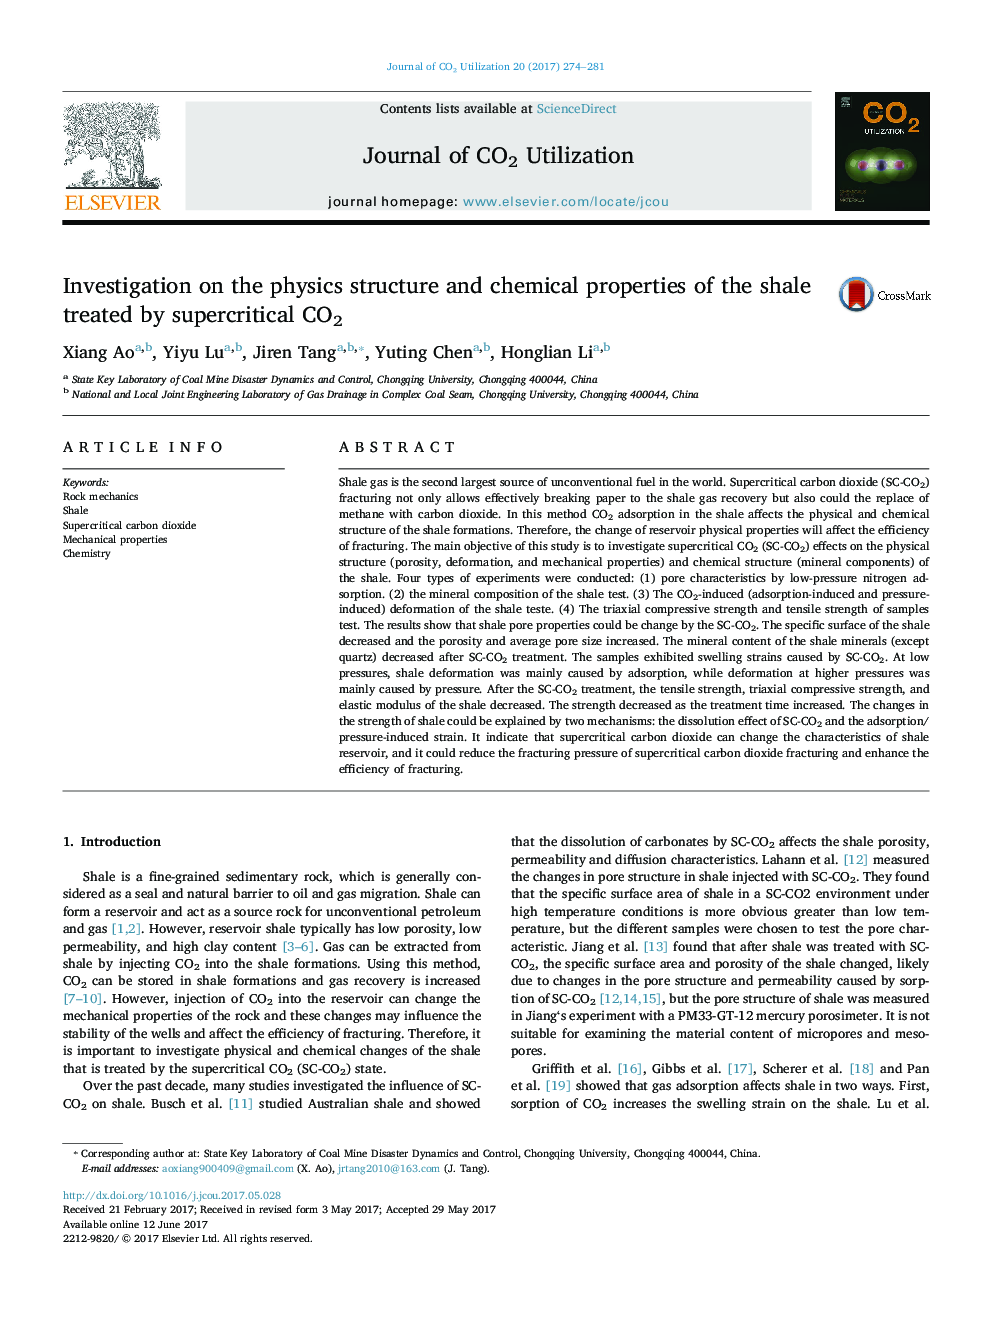 Investigation on the physics structure and chemical properties of the shale treated by supercritical CO2